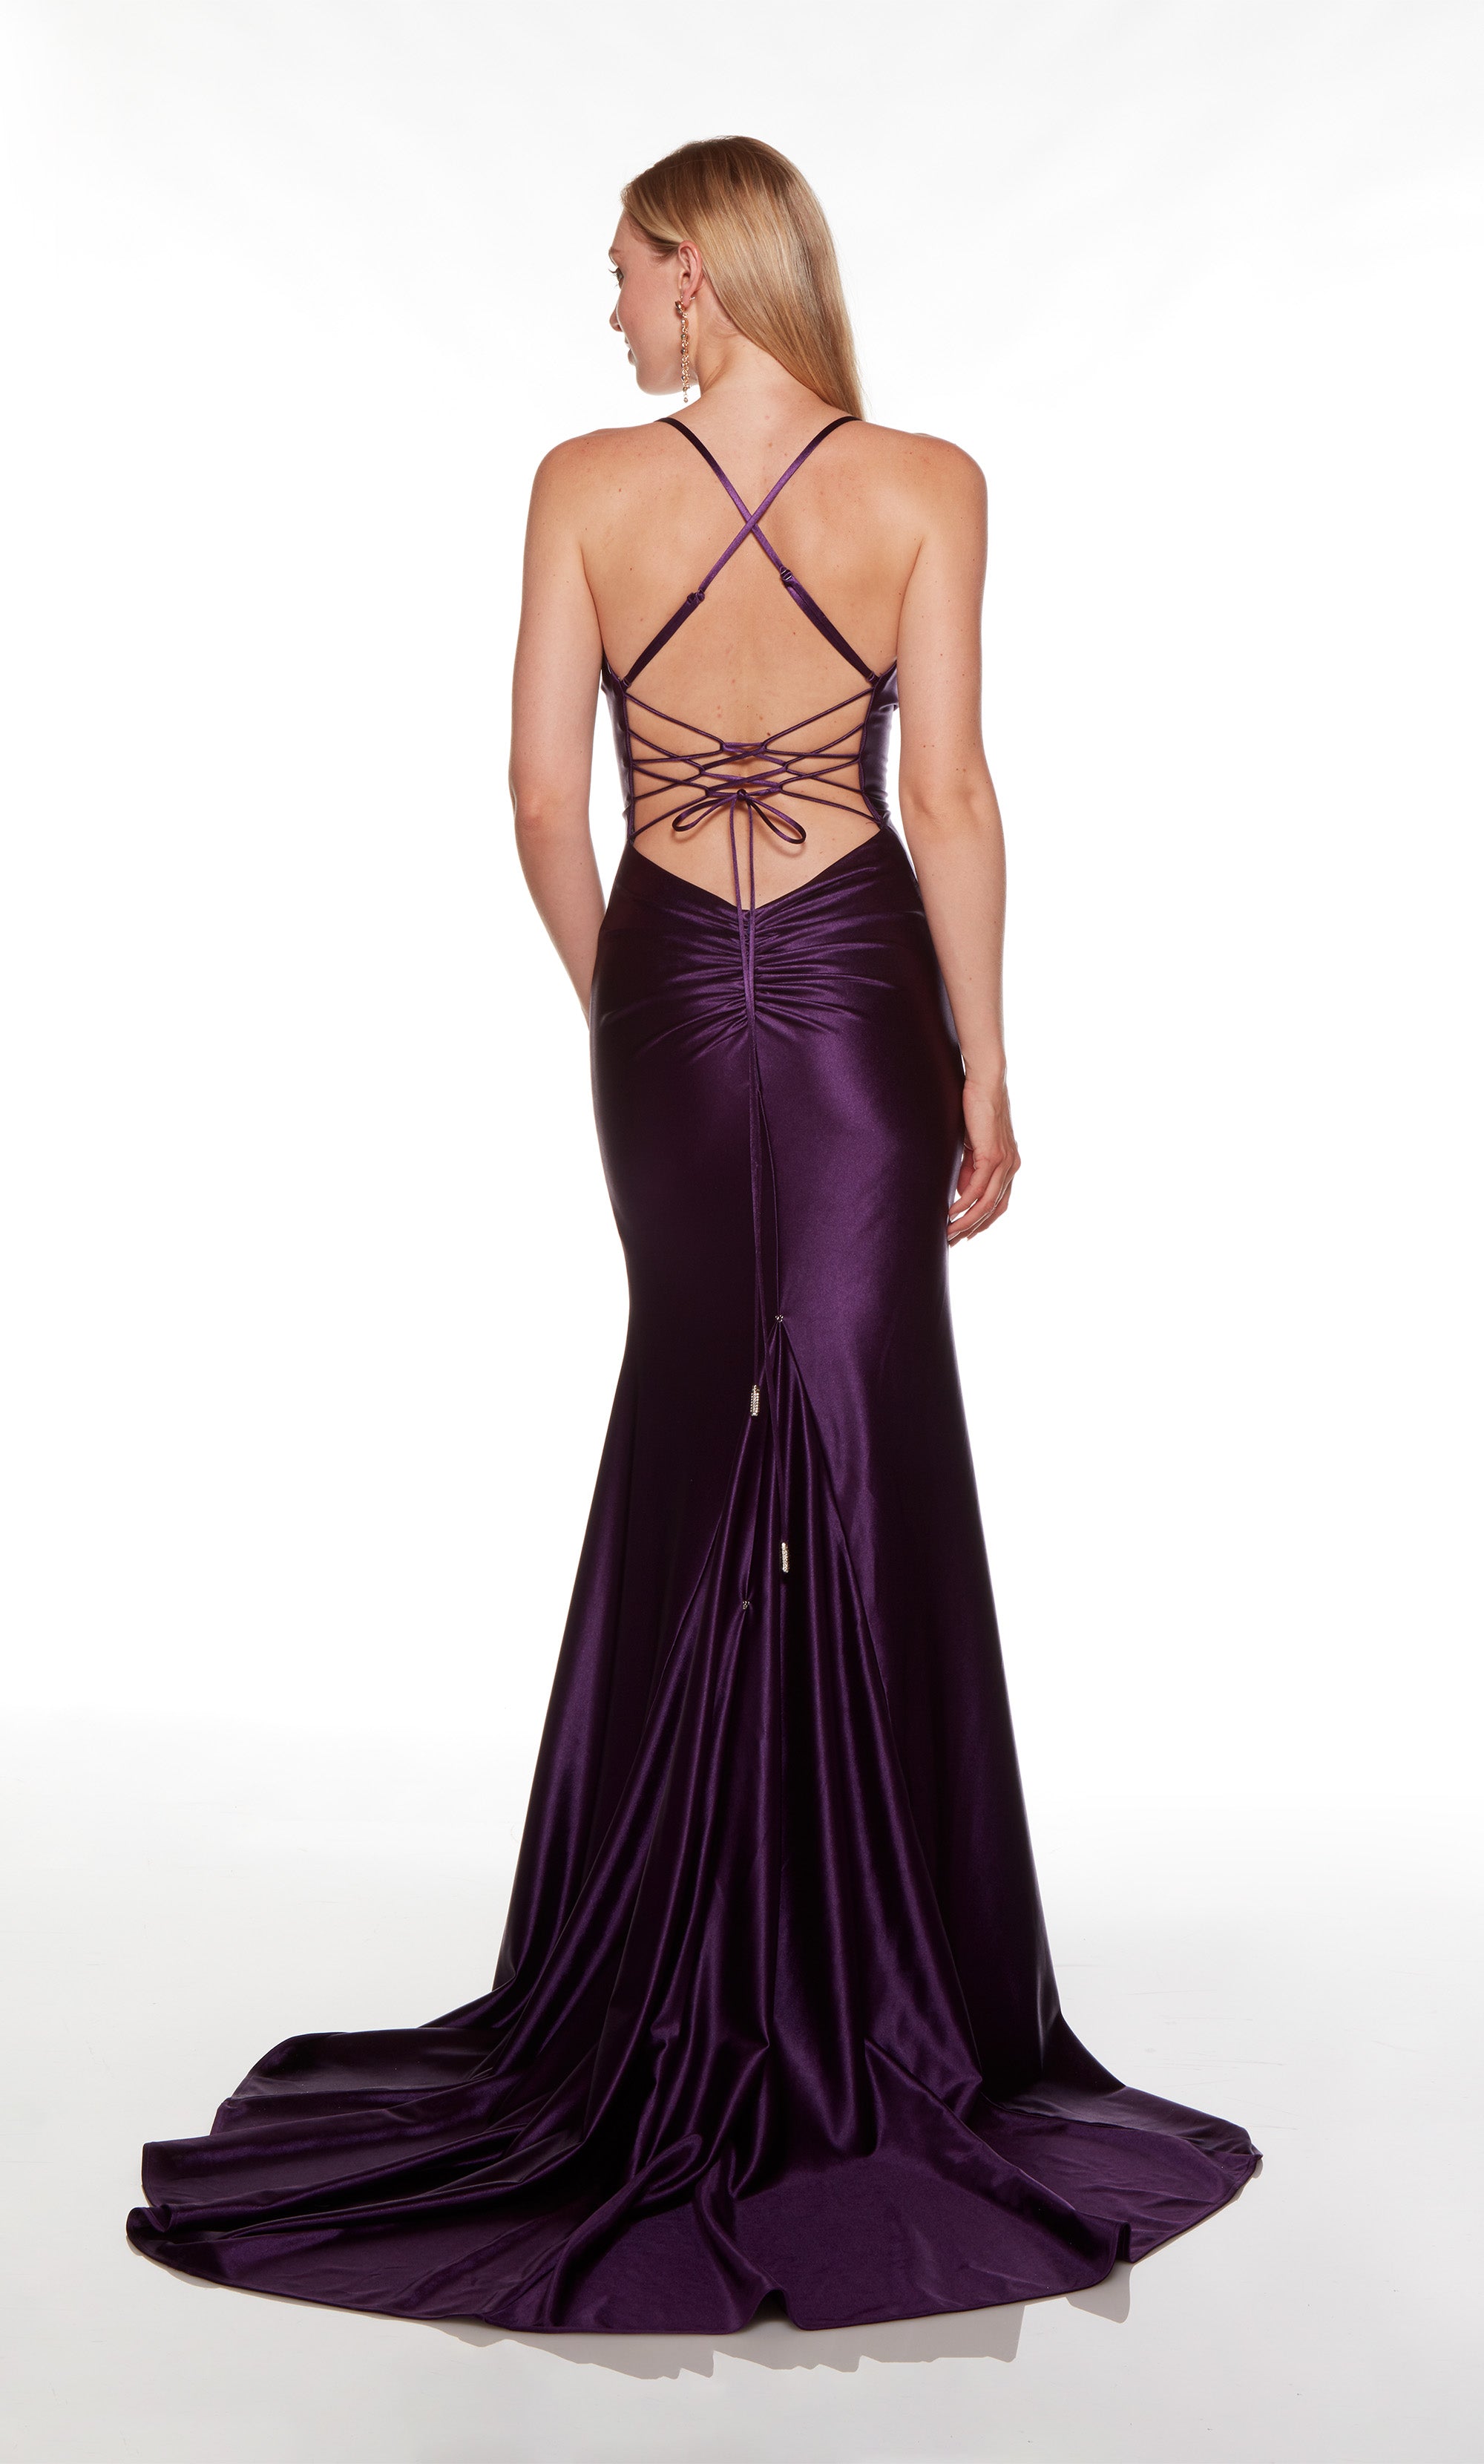 Black Prom Dress With Cowl Neck and Train Open Back Slip Dress for